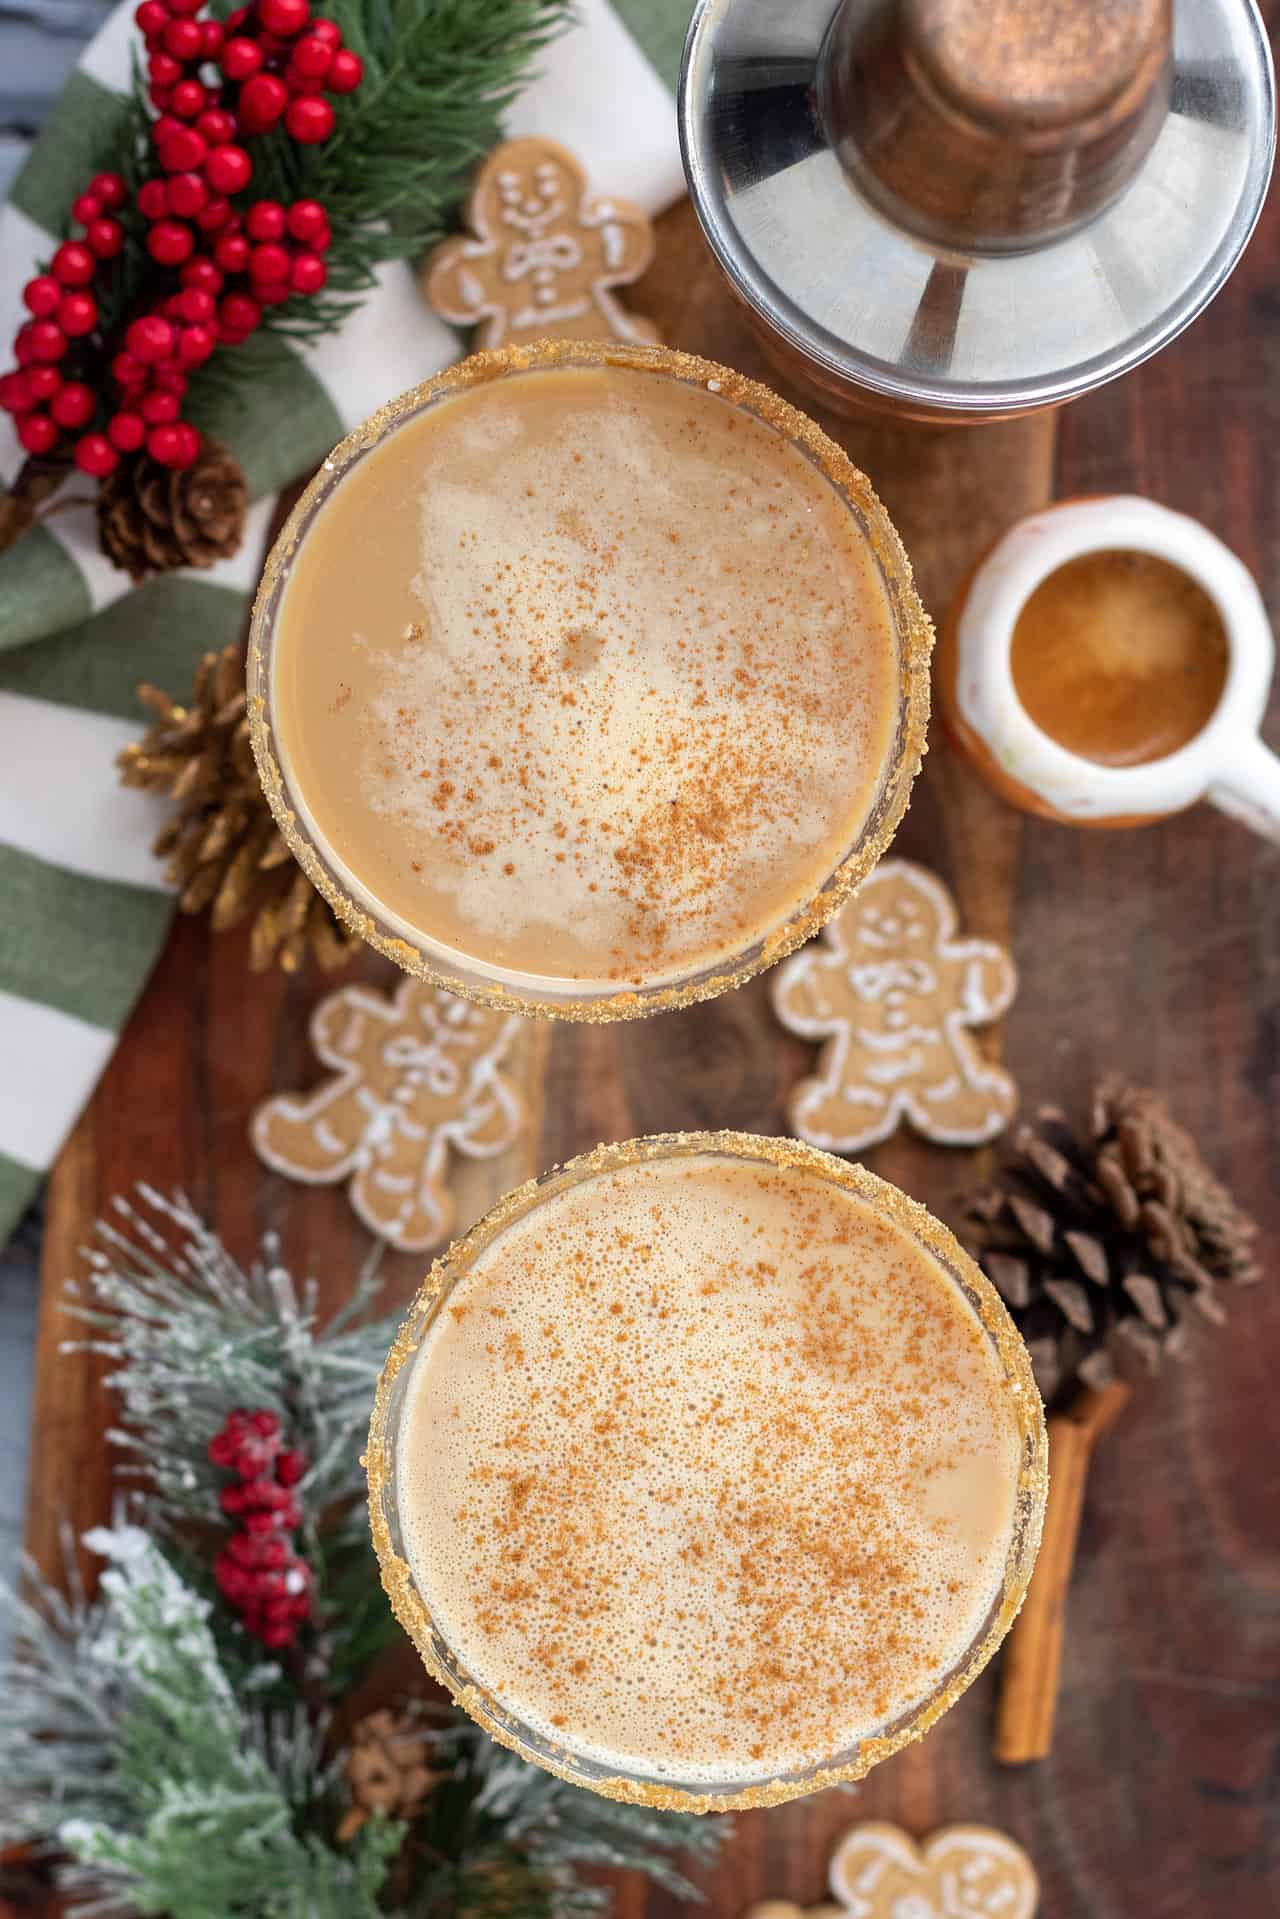 An overhead shot of two martini glasses filled with gingerbread espresso cocktail. The martinis have a sprinkle of cinnamon on top. There's two gingerbread men cookies, pinecones, and a snow frosted tree branch in the background. There's a small cup of espresso too.